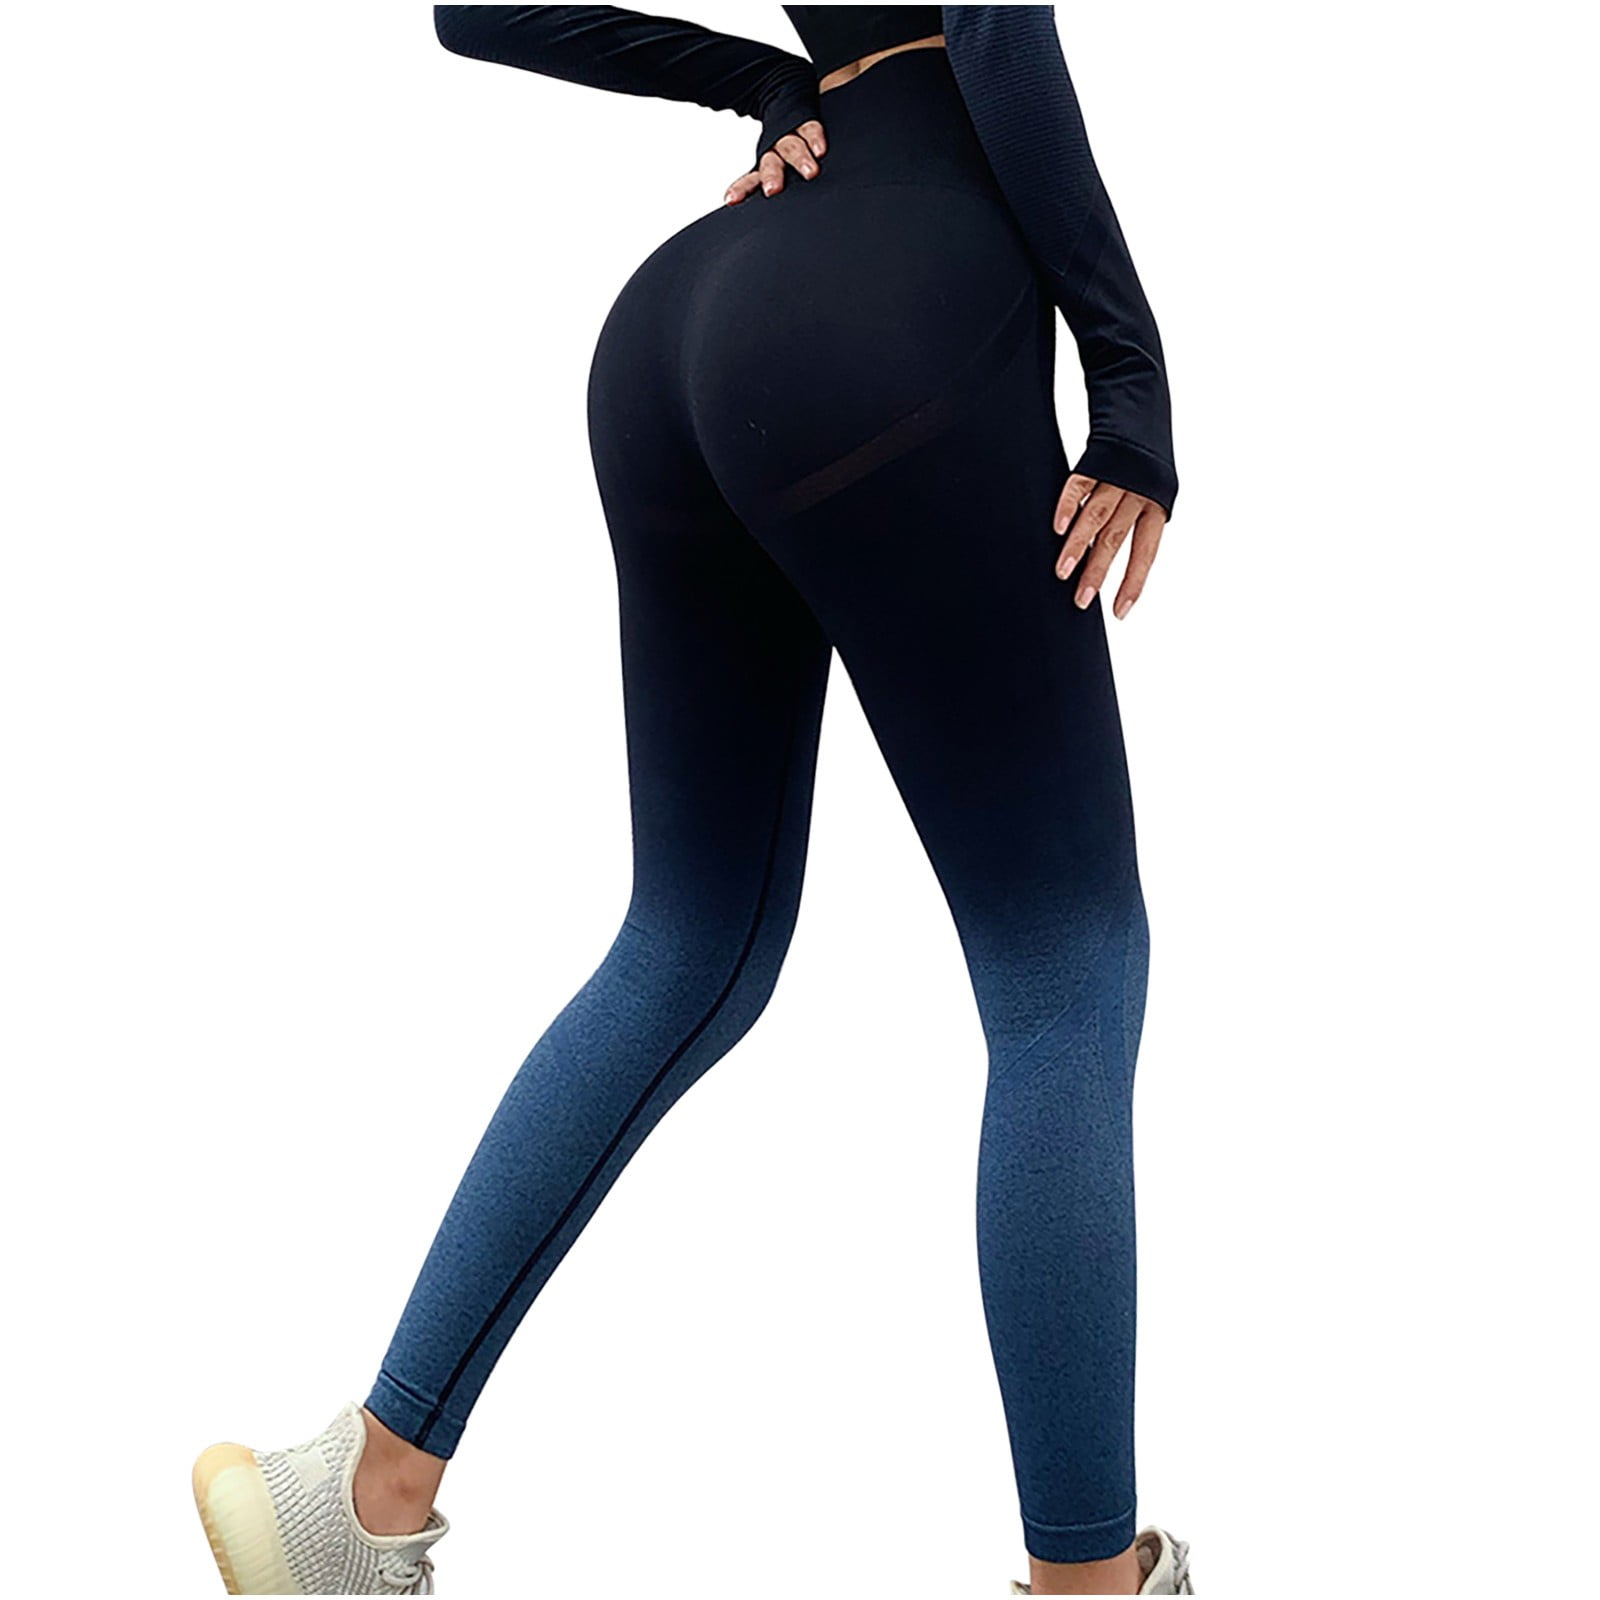 HAPIMO Women's Sports Yoga Leggings Flare Pants Summer Discount Stretch Fit  Solid Trousers for Girls Fashion Sale High Elastic Waist Breathable Gray XL  - Walmart.com